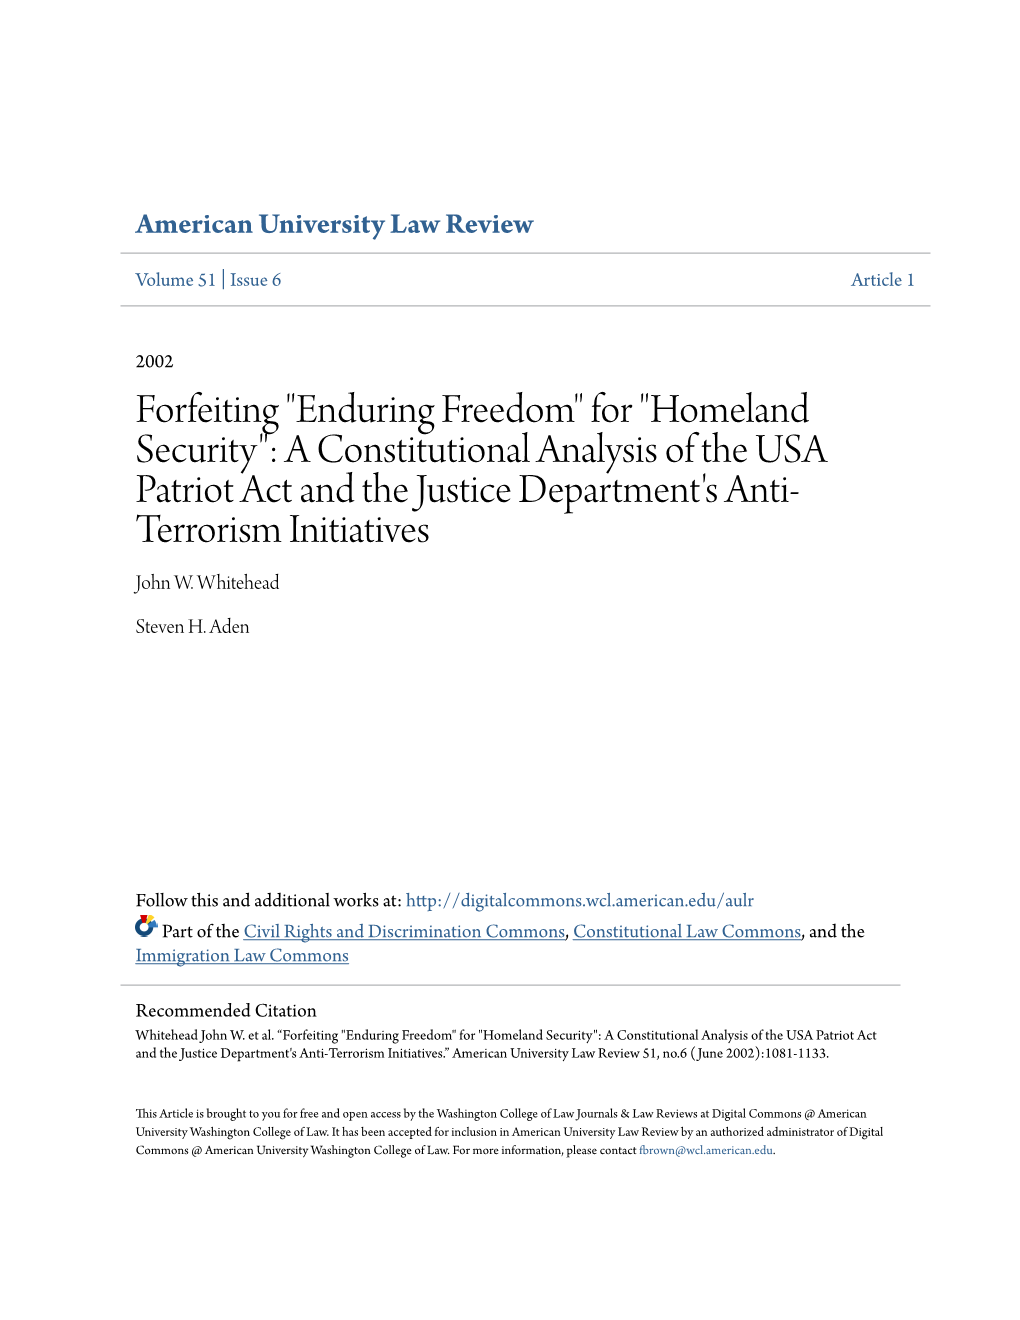 Homeland Security": a Constitutional Analysis of the USA Patriot Act and the Justice Department's Anti- Terrorism Initiatives John W